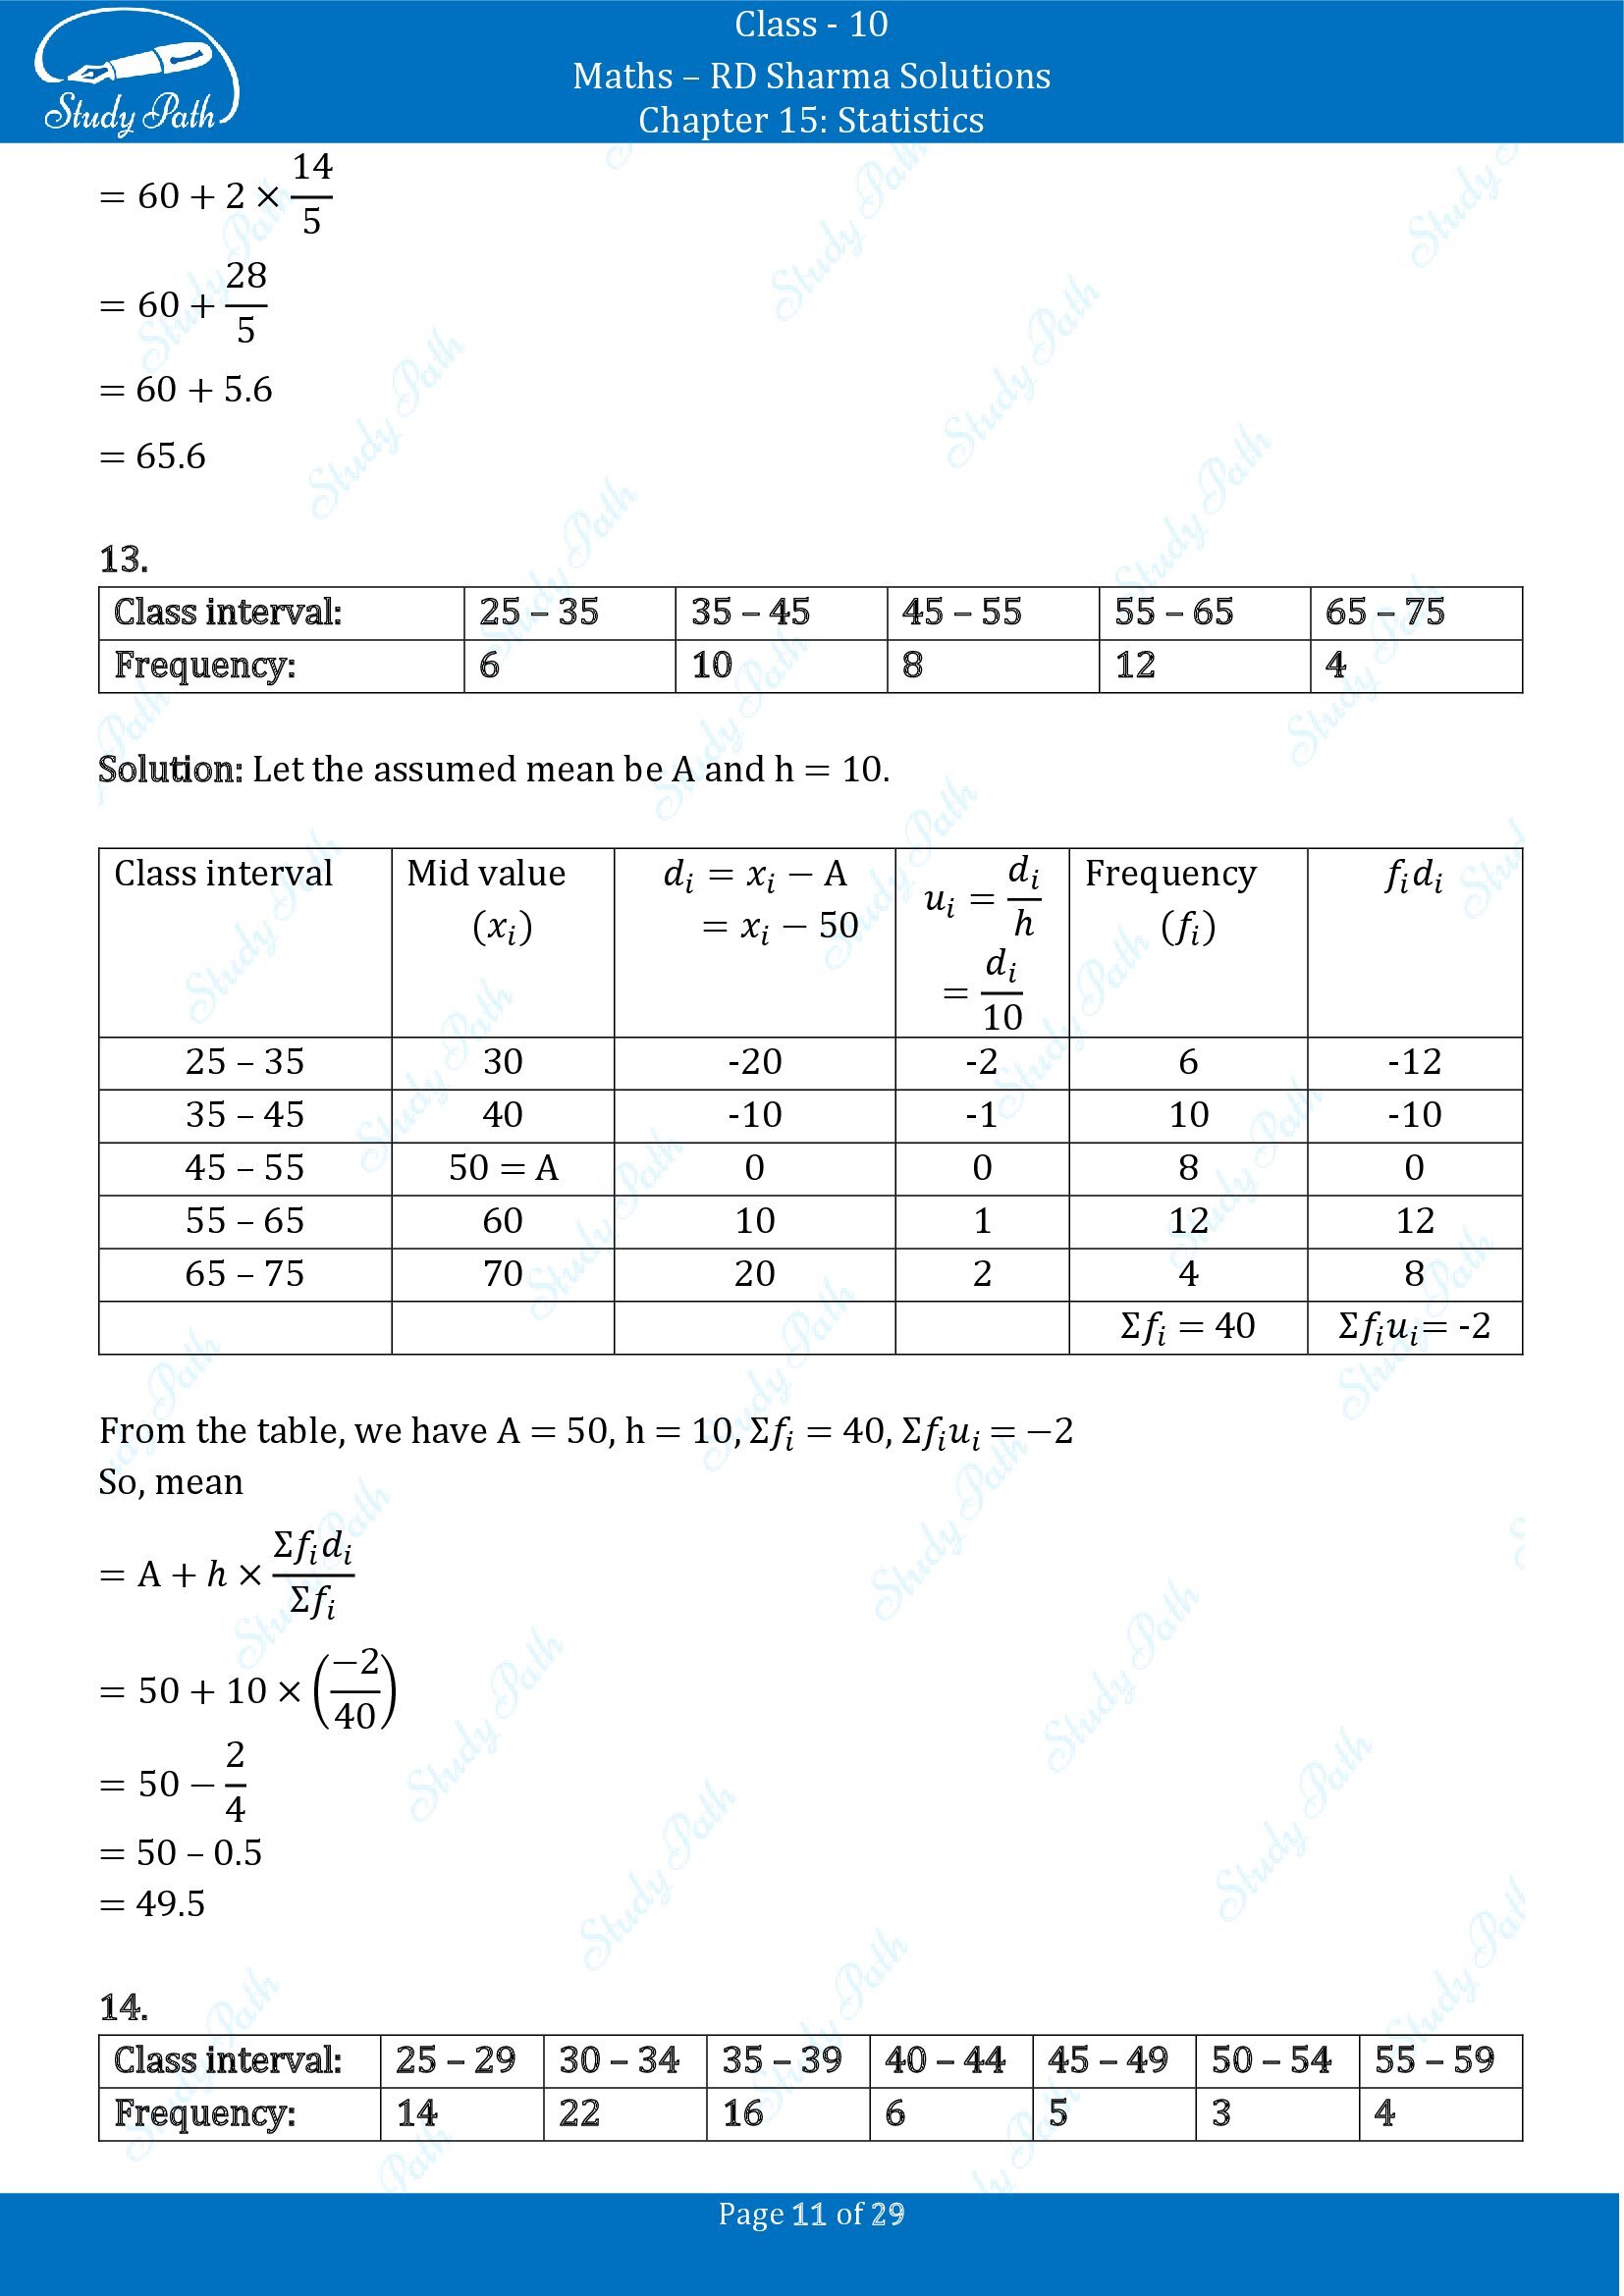 RD Sharma Solutions Class 10 Chapter 15 Statistics Exercise 15.3 0011